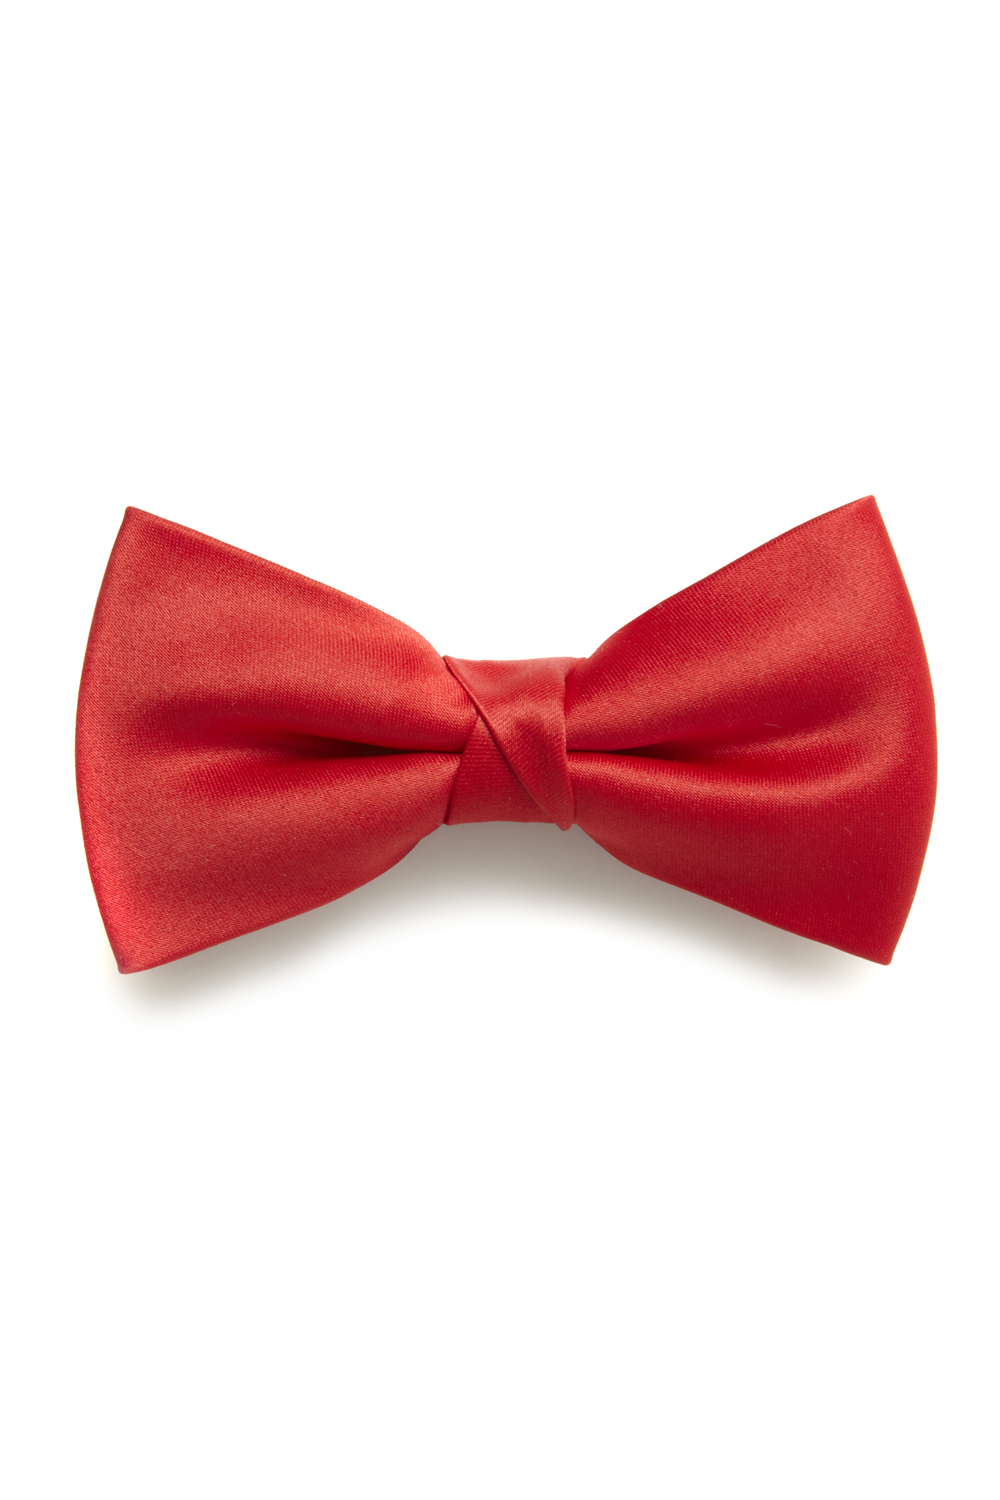 13 Red Bowtie Free Cliparts That You Can Download To You Computer And    